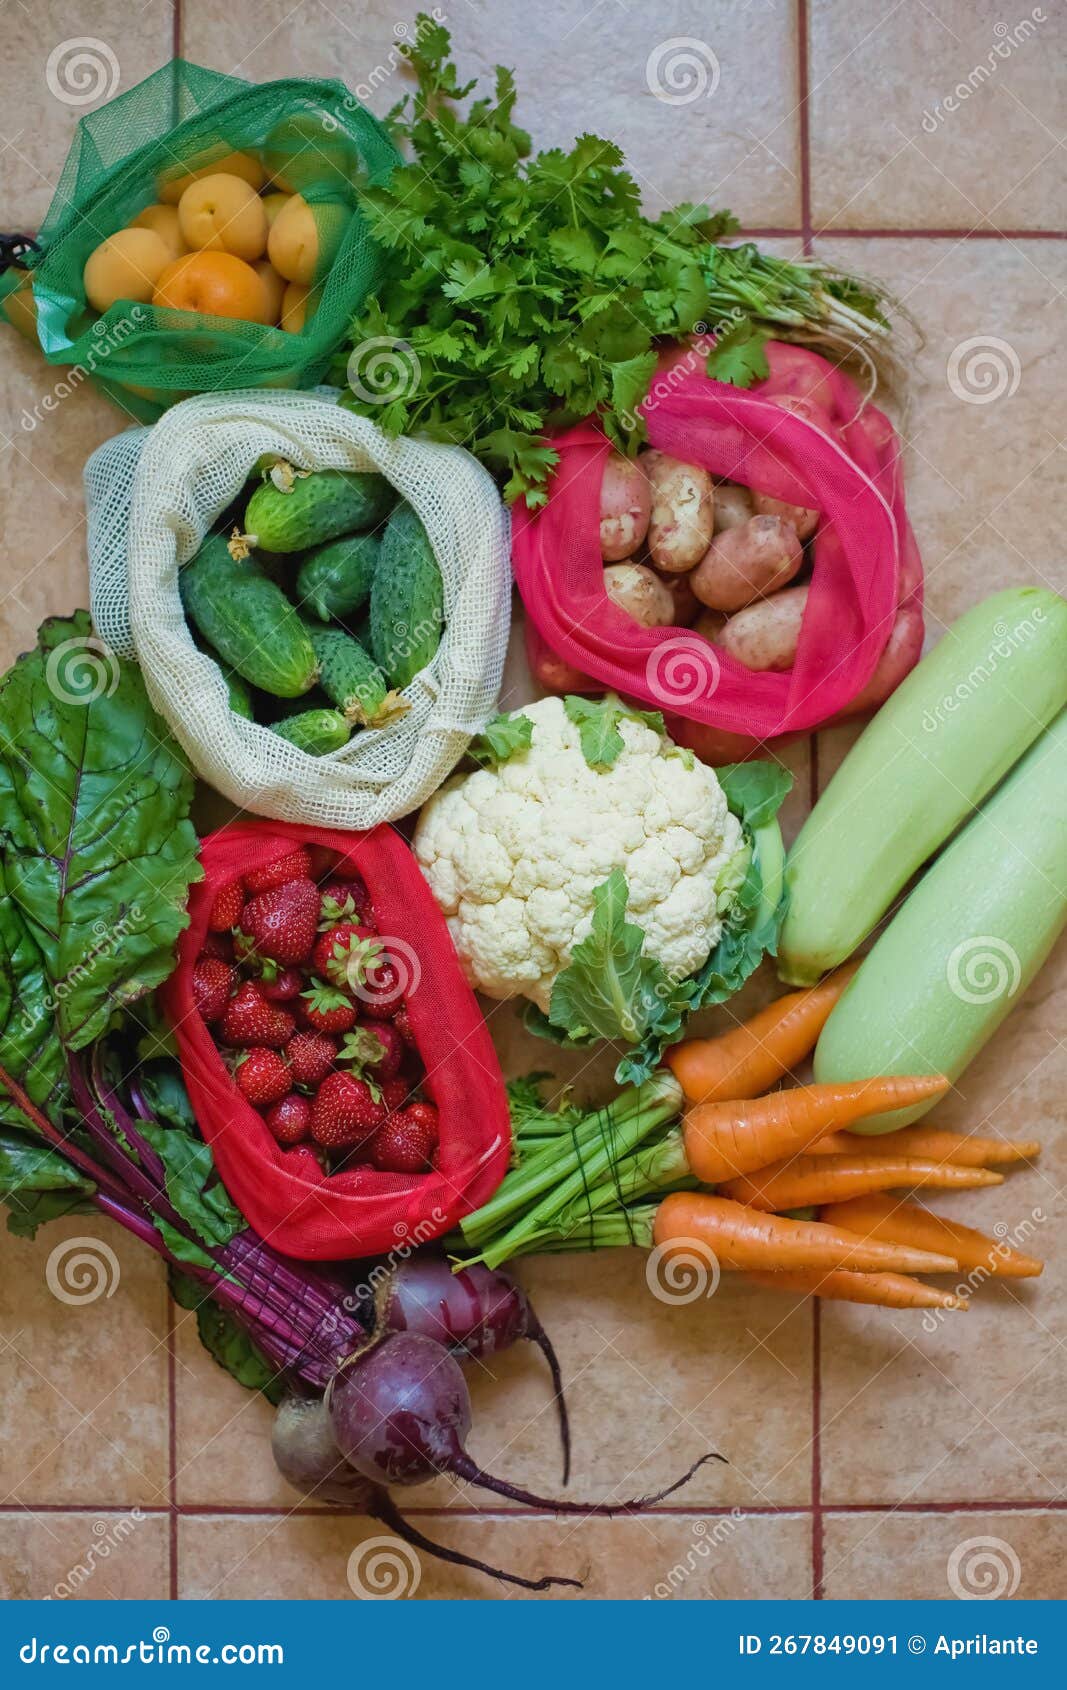 various vegetables in textile eco bags